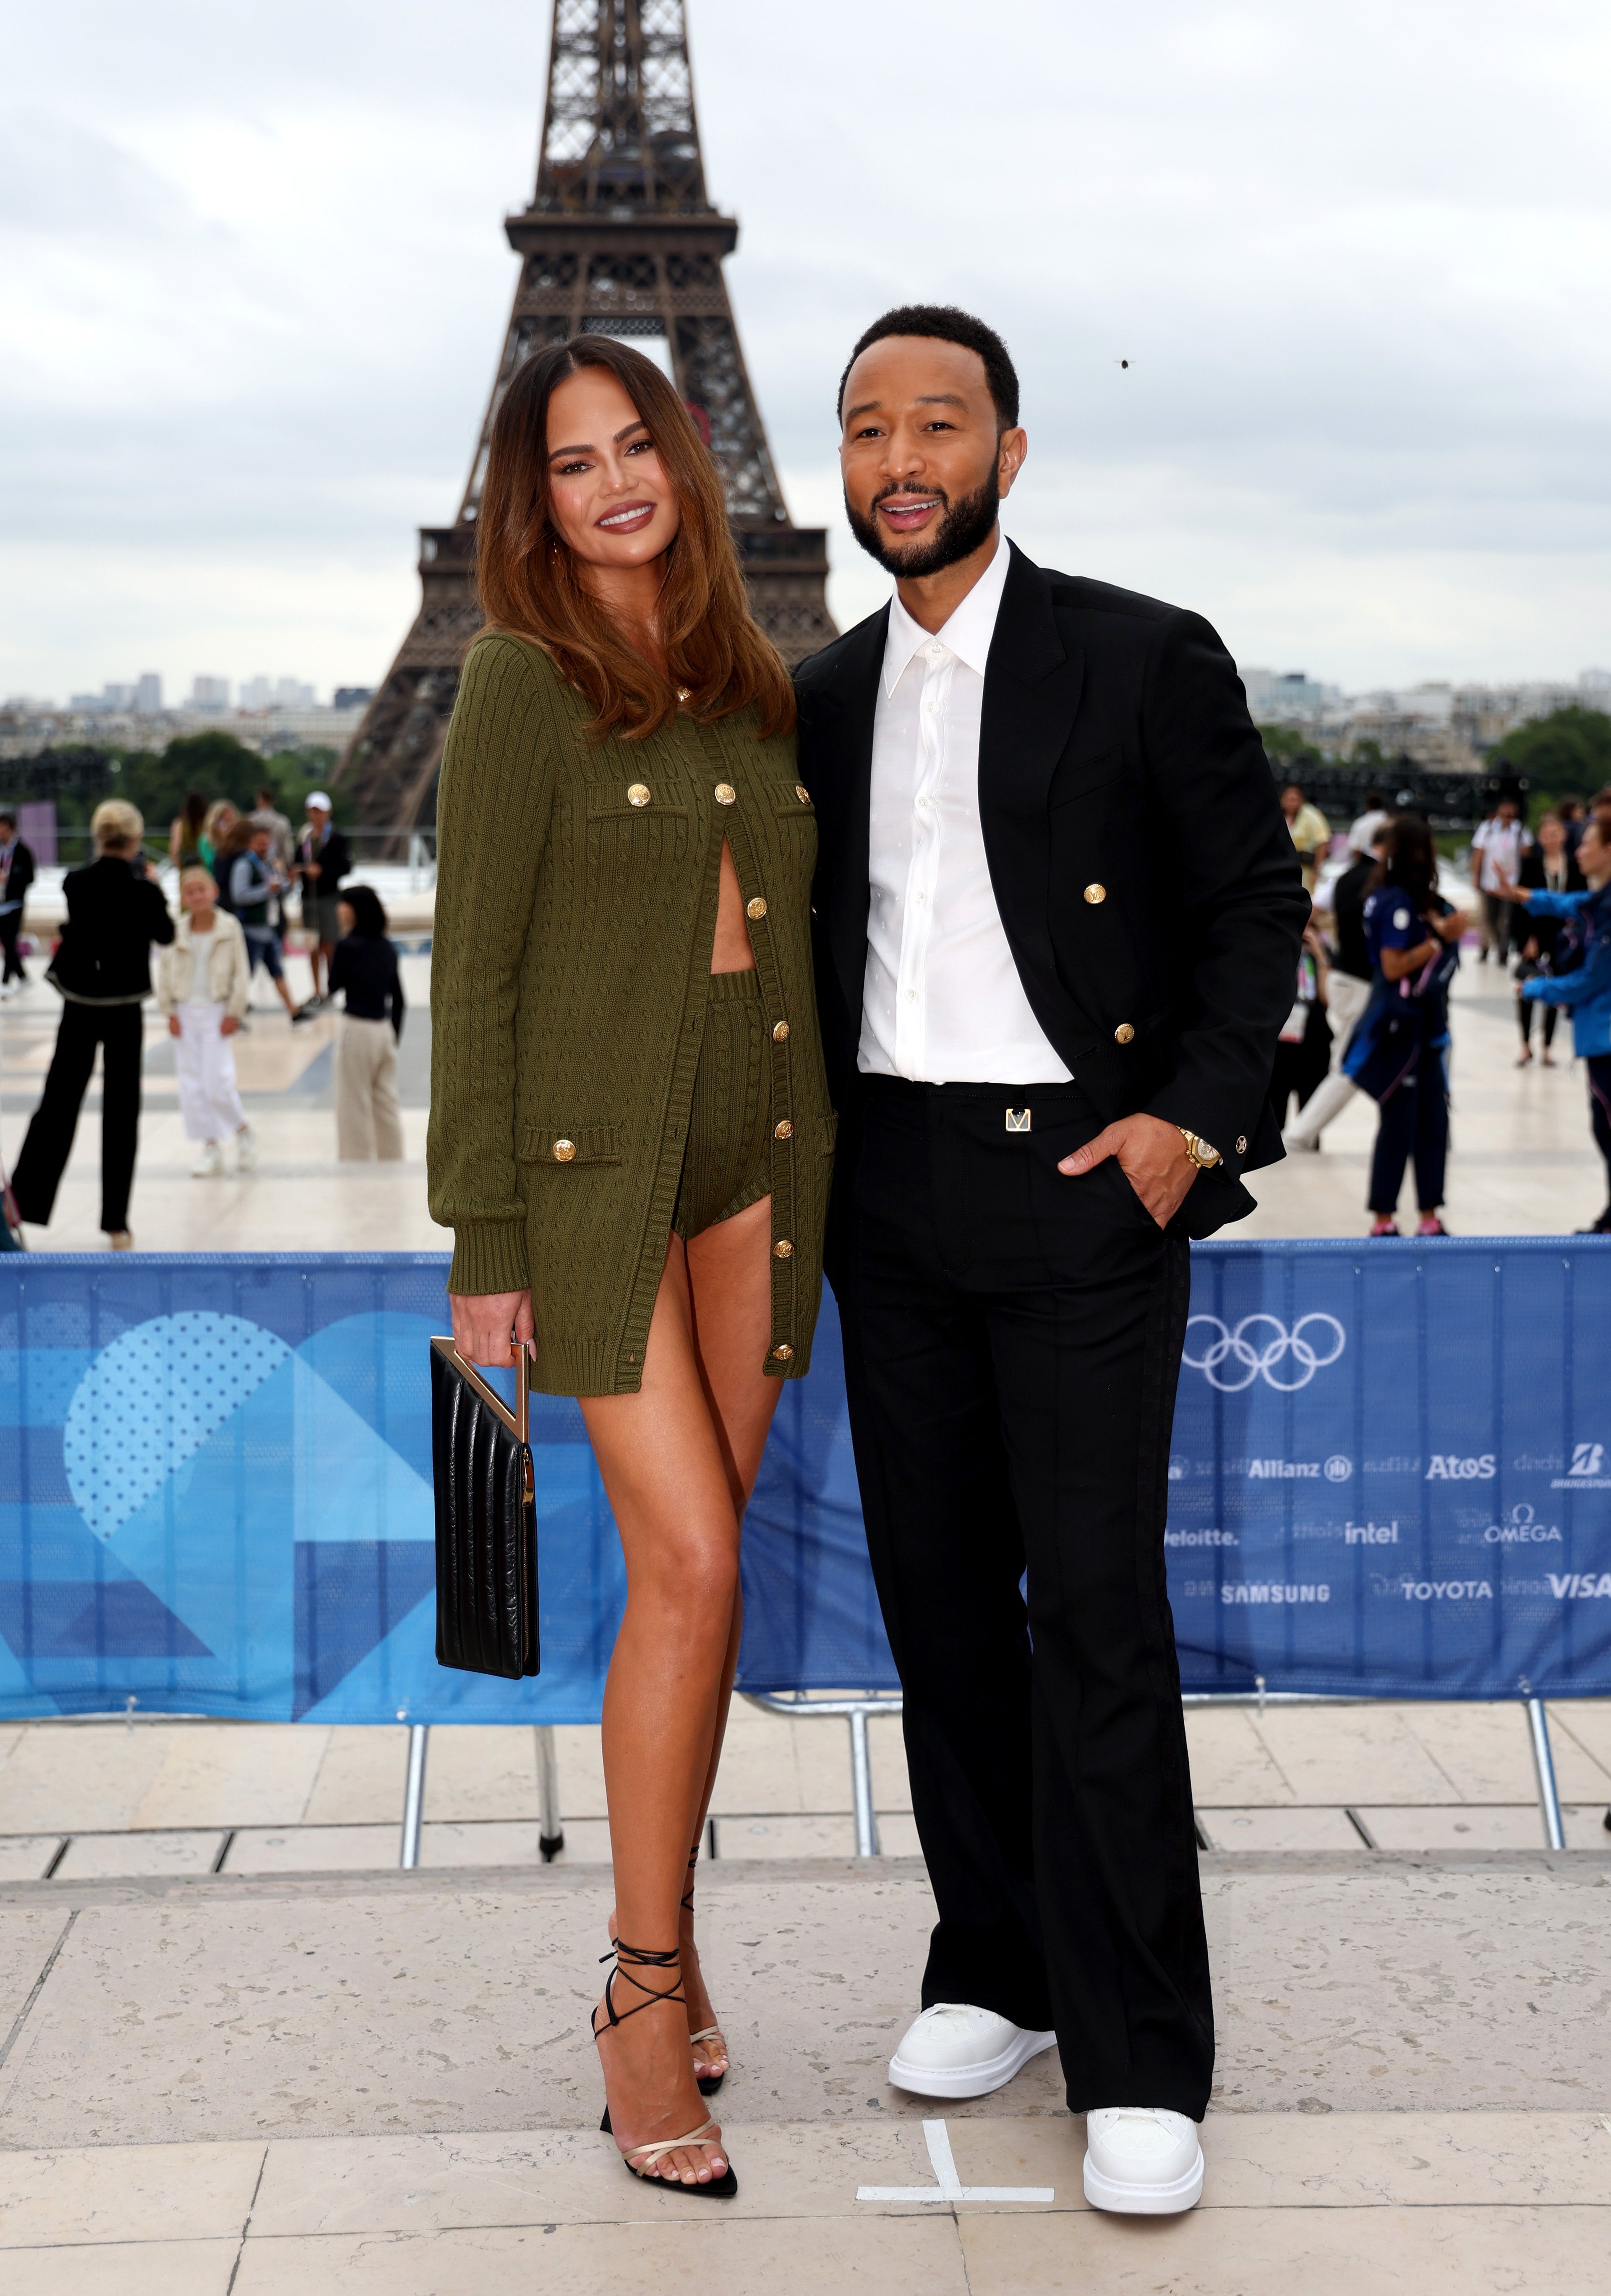 Teigen donned a matching army green jacket and micro-shorts set with lace-up, open-toe heels outside the opening ceremony entrance.